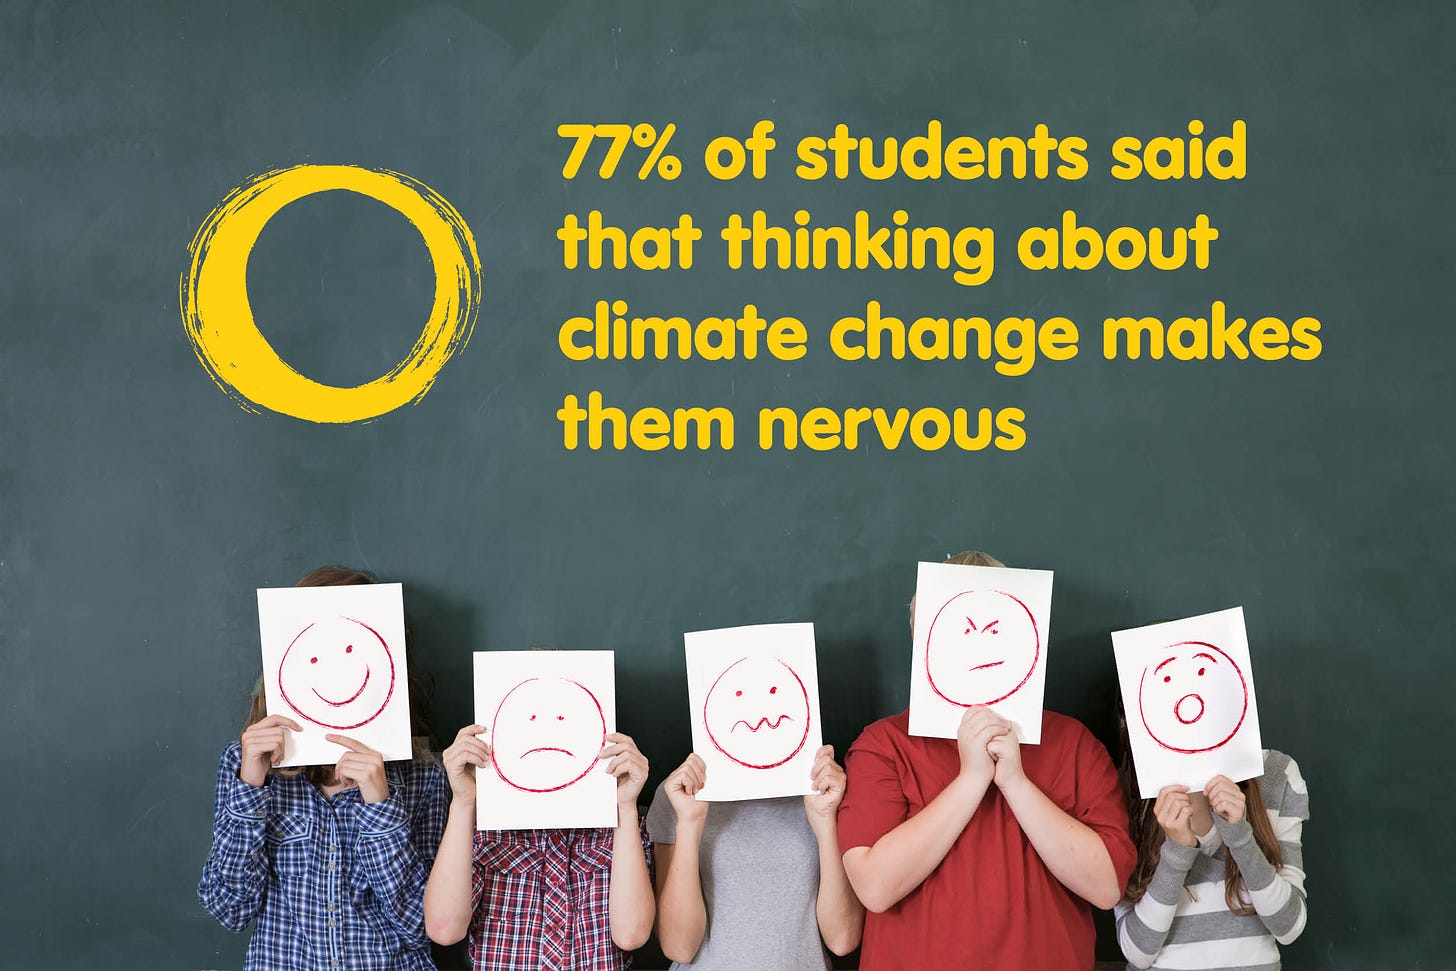 77% of students said that thinking about climate change made them nervous